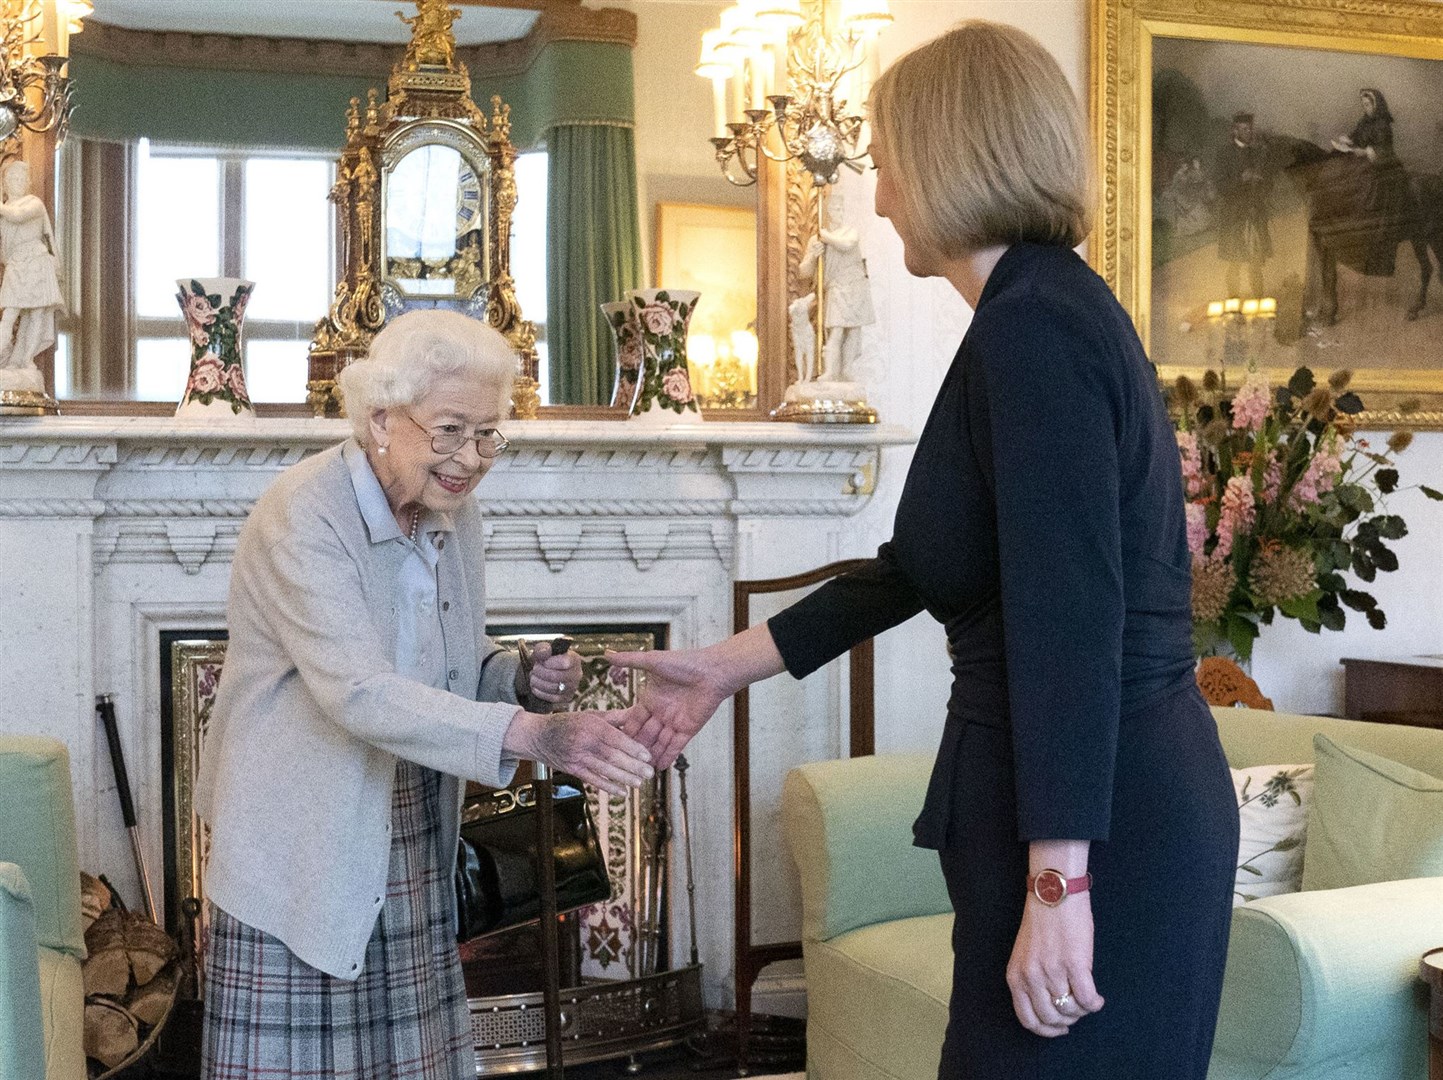 Queen Elizabeth II welcoming Liz Truss at Balmoral, Scotland to appoint her as prime minister (Jane Barlow/PA)